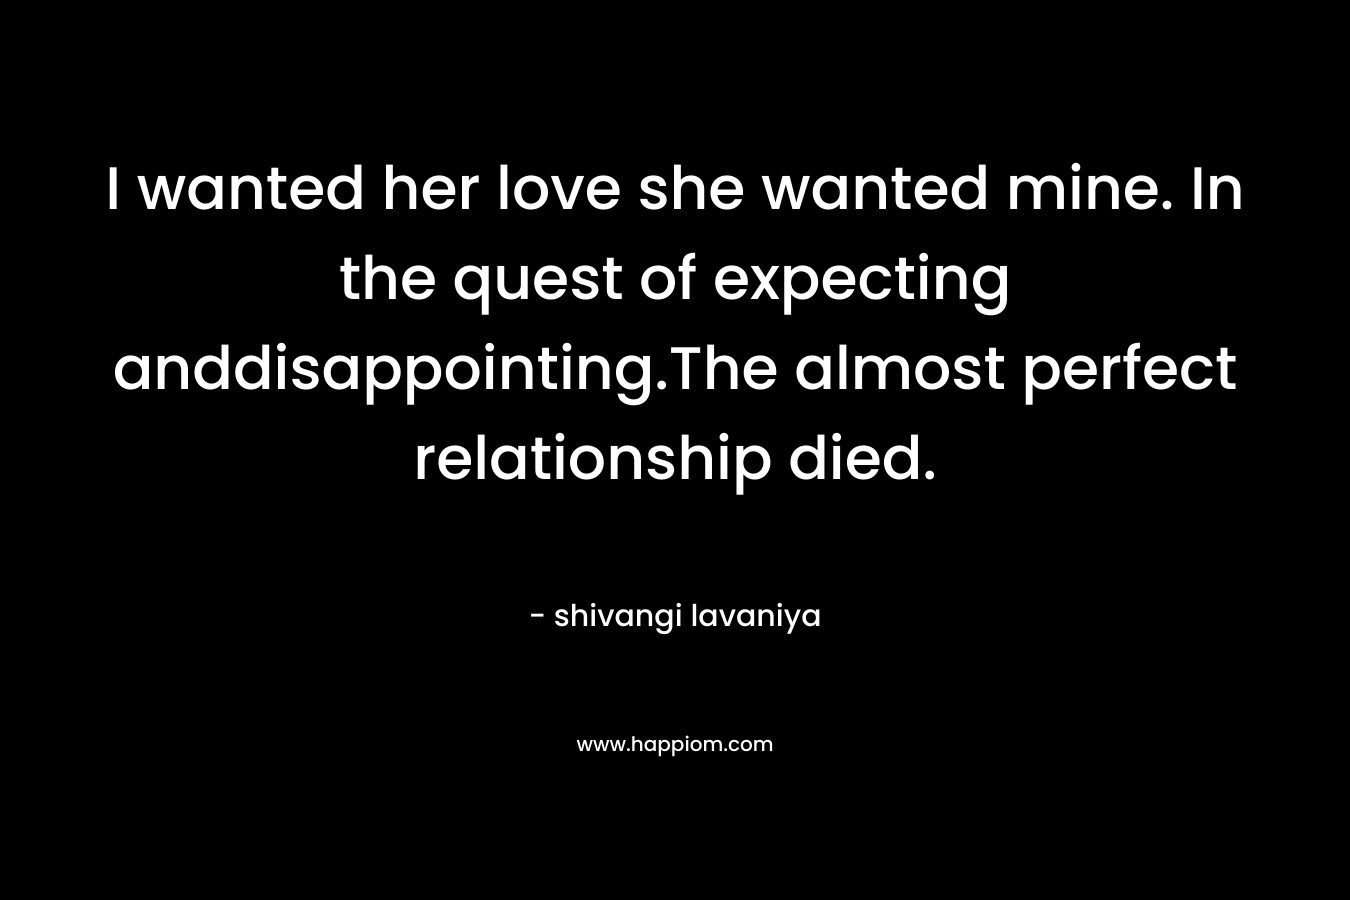 I wanted her love she wanted mine. In the quest of expecting anddisappointing.The almost perfect relationship died. – shivangi lavaniya